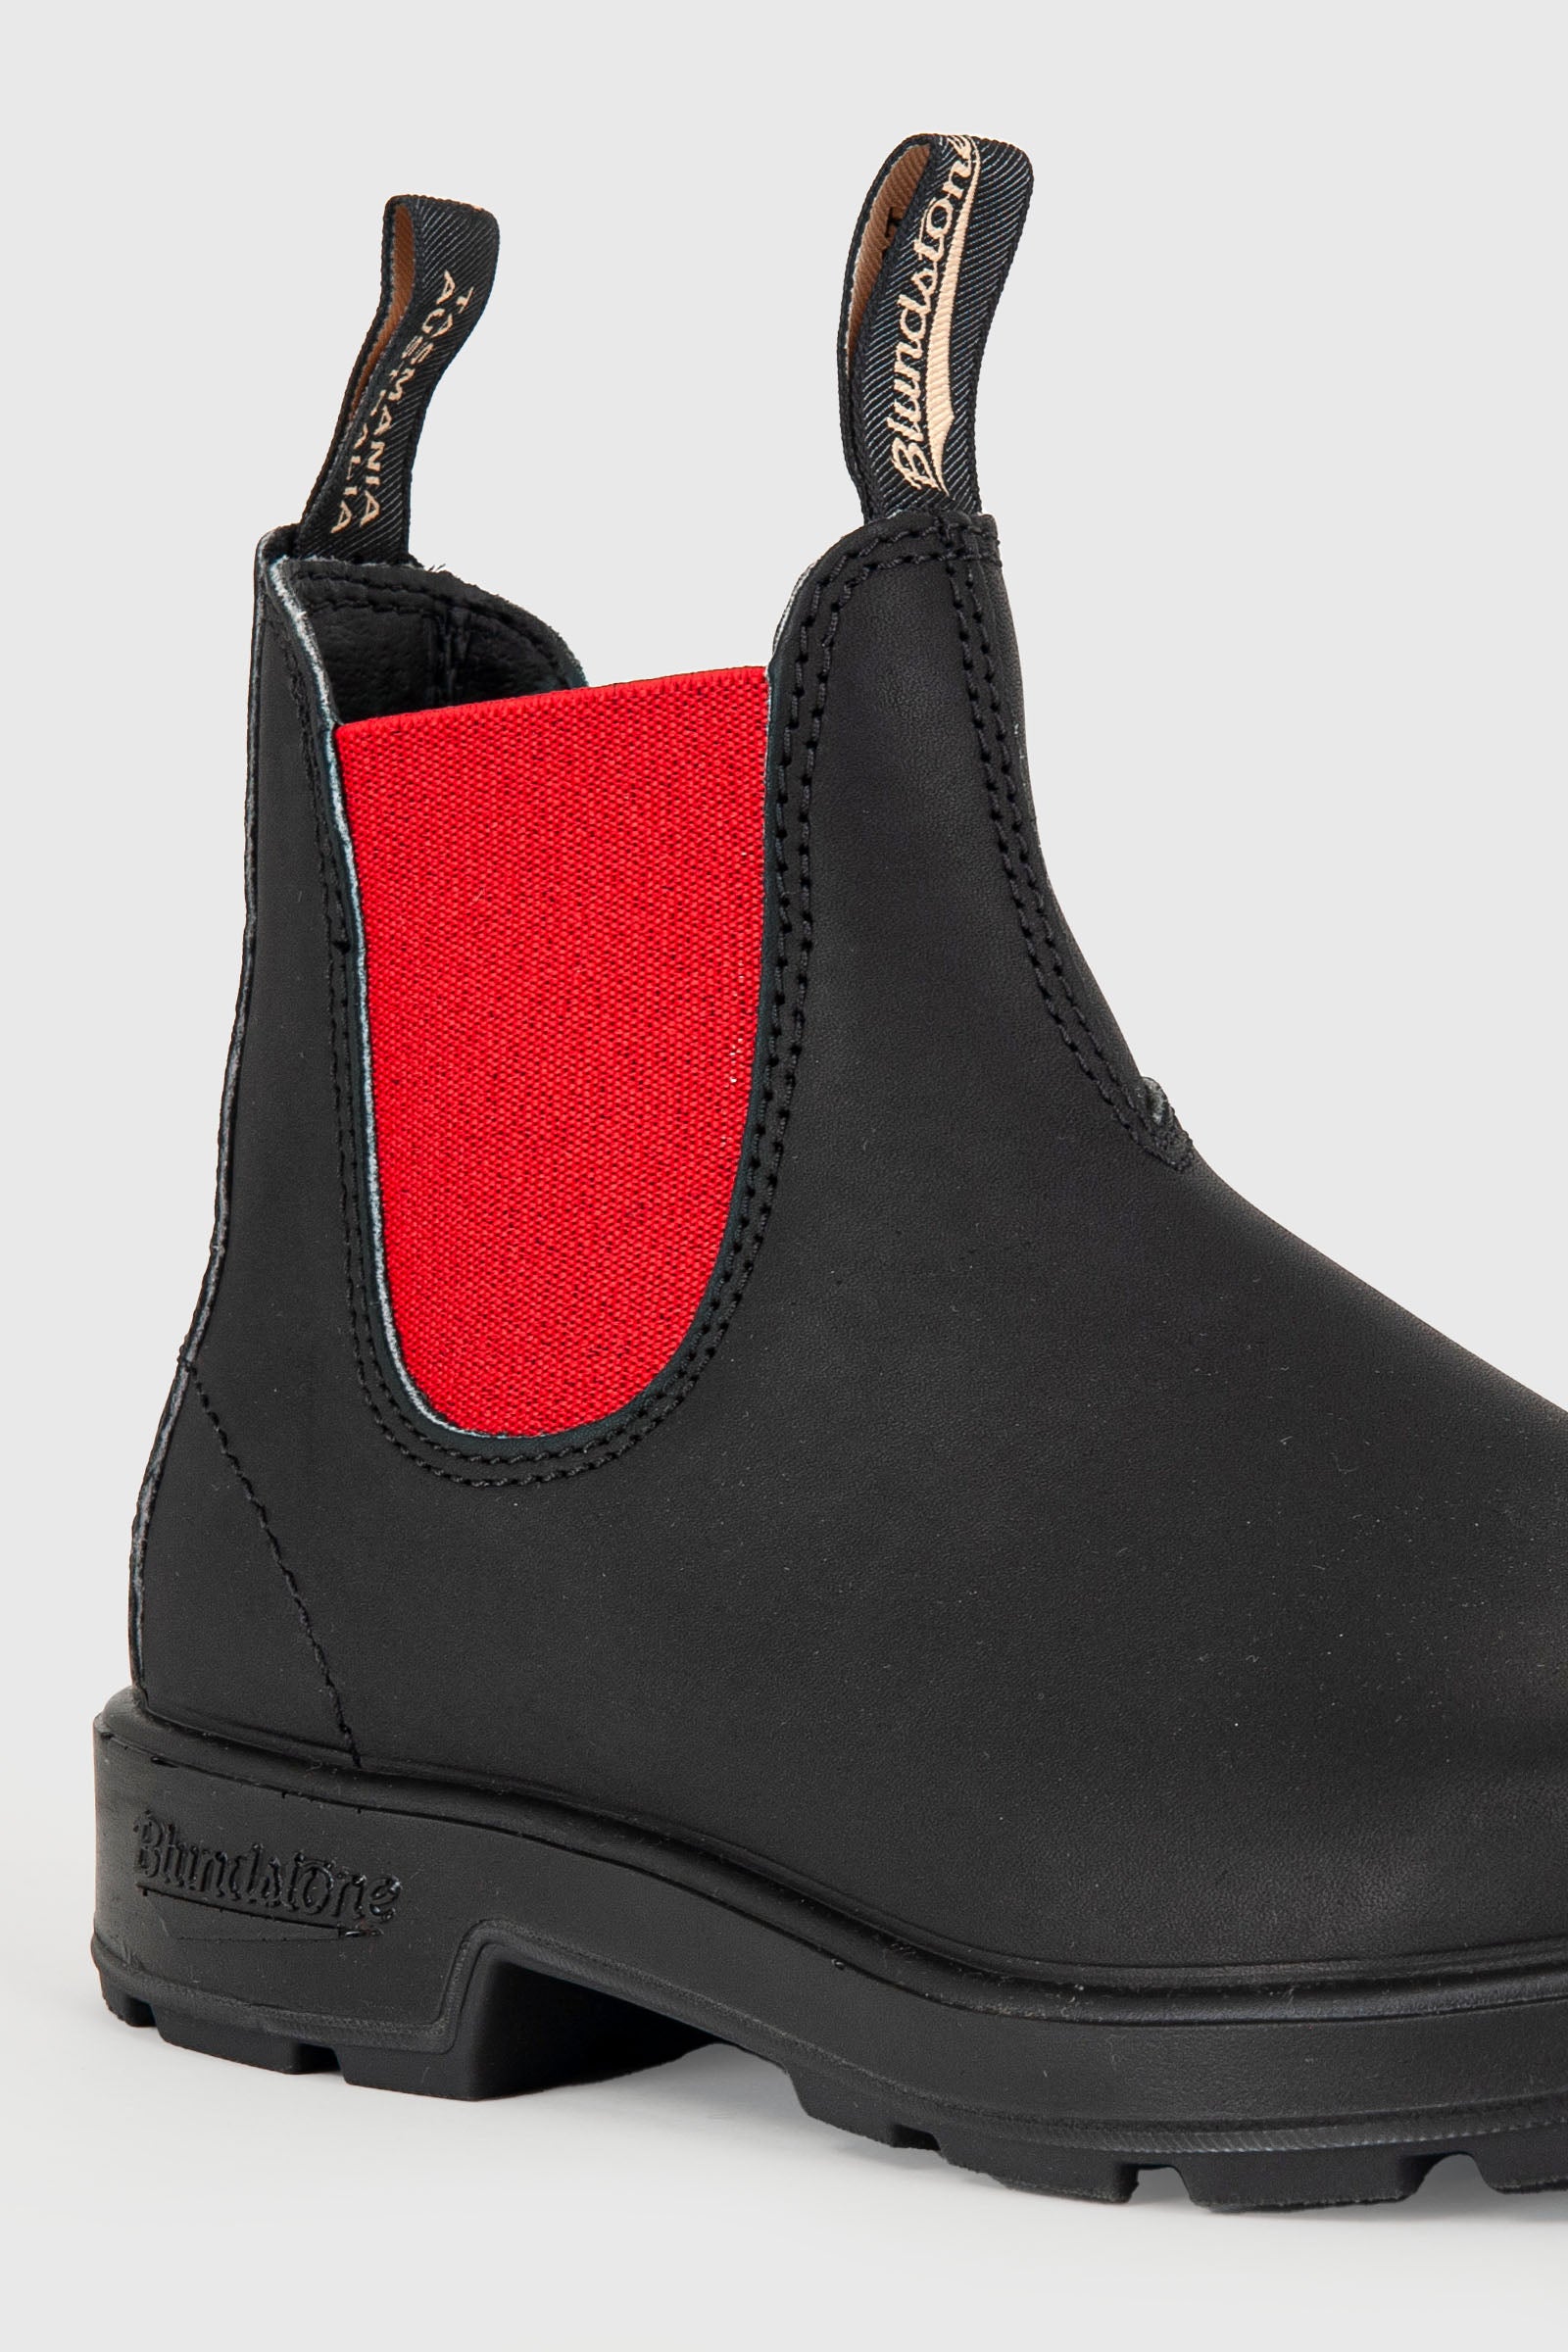 Blundstone Beatle Ankle Boot 508 Leather Black/Red - 5